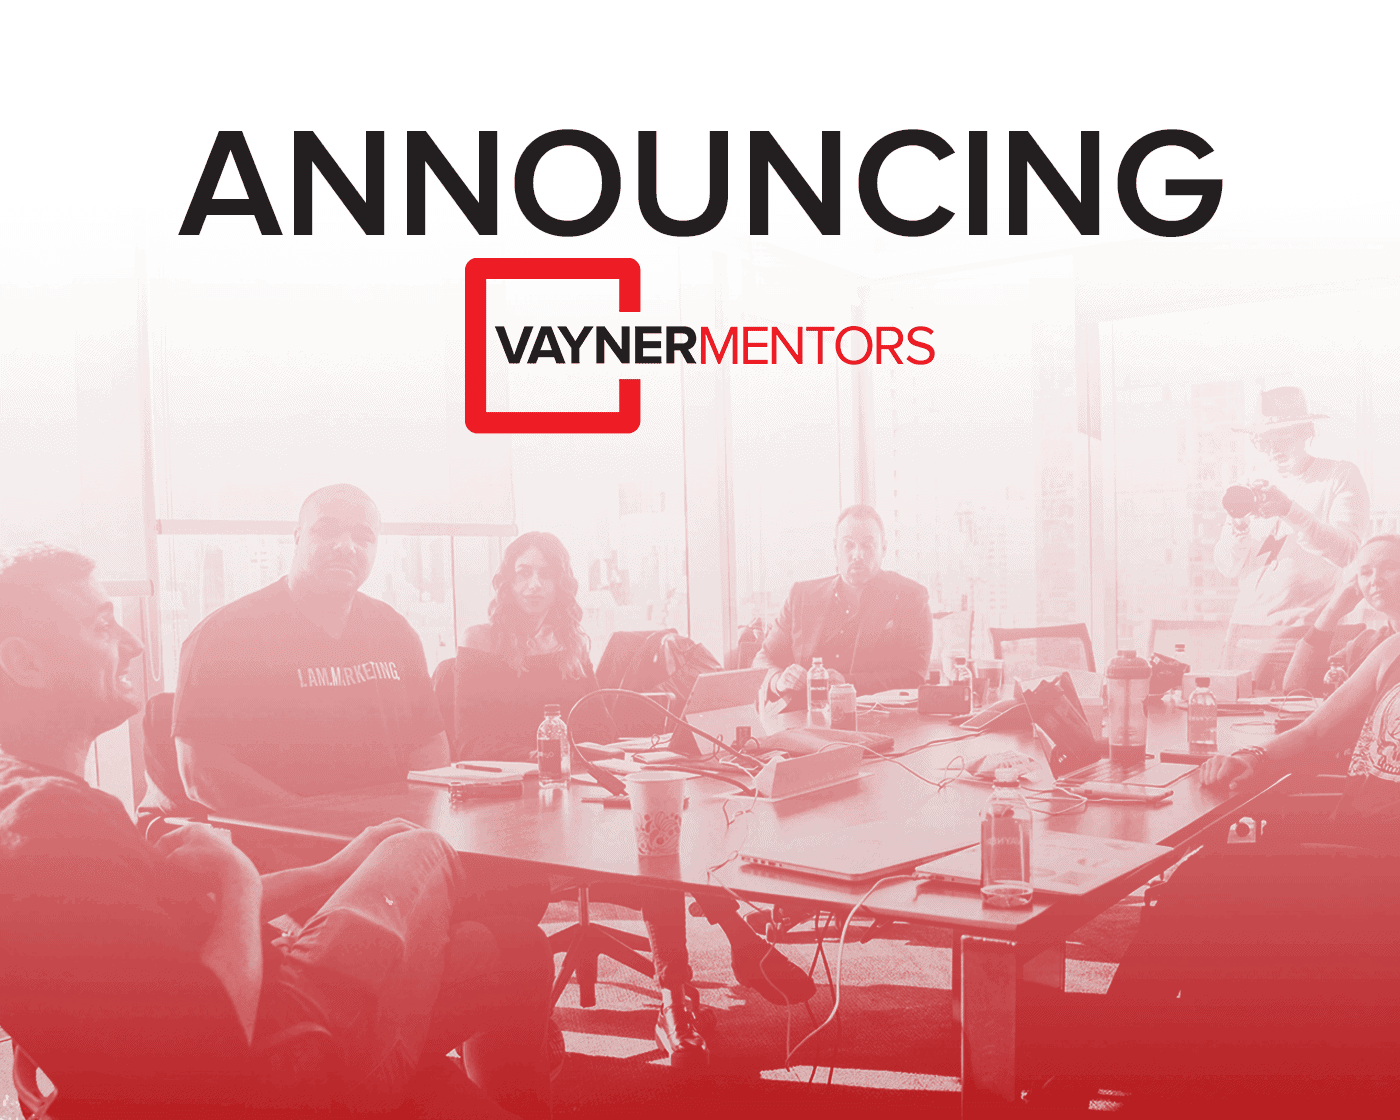 Announcing VaynerMentors: VaynerMedia’s Newest Offering to Grow and Scale Your Business